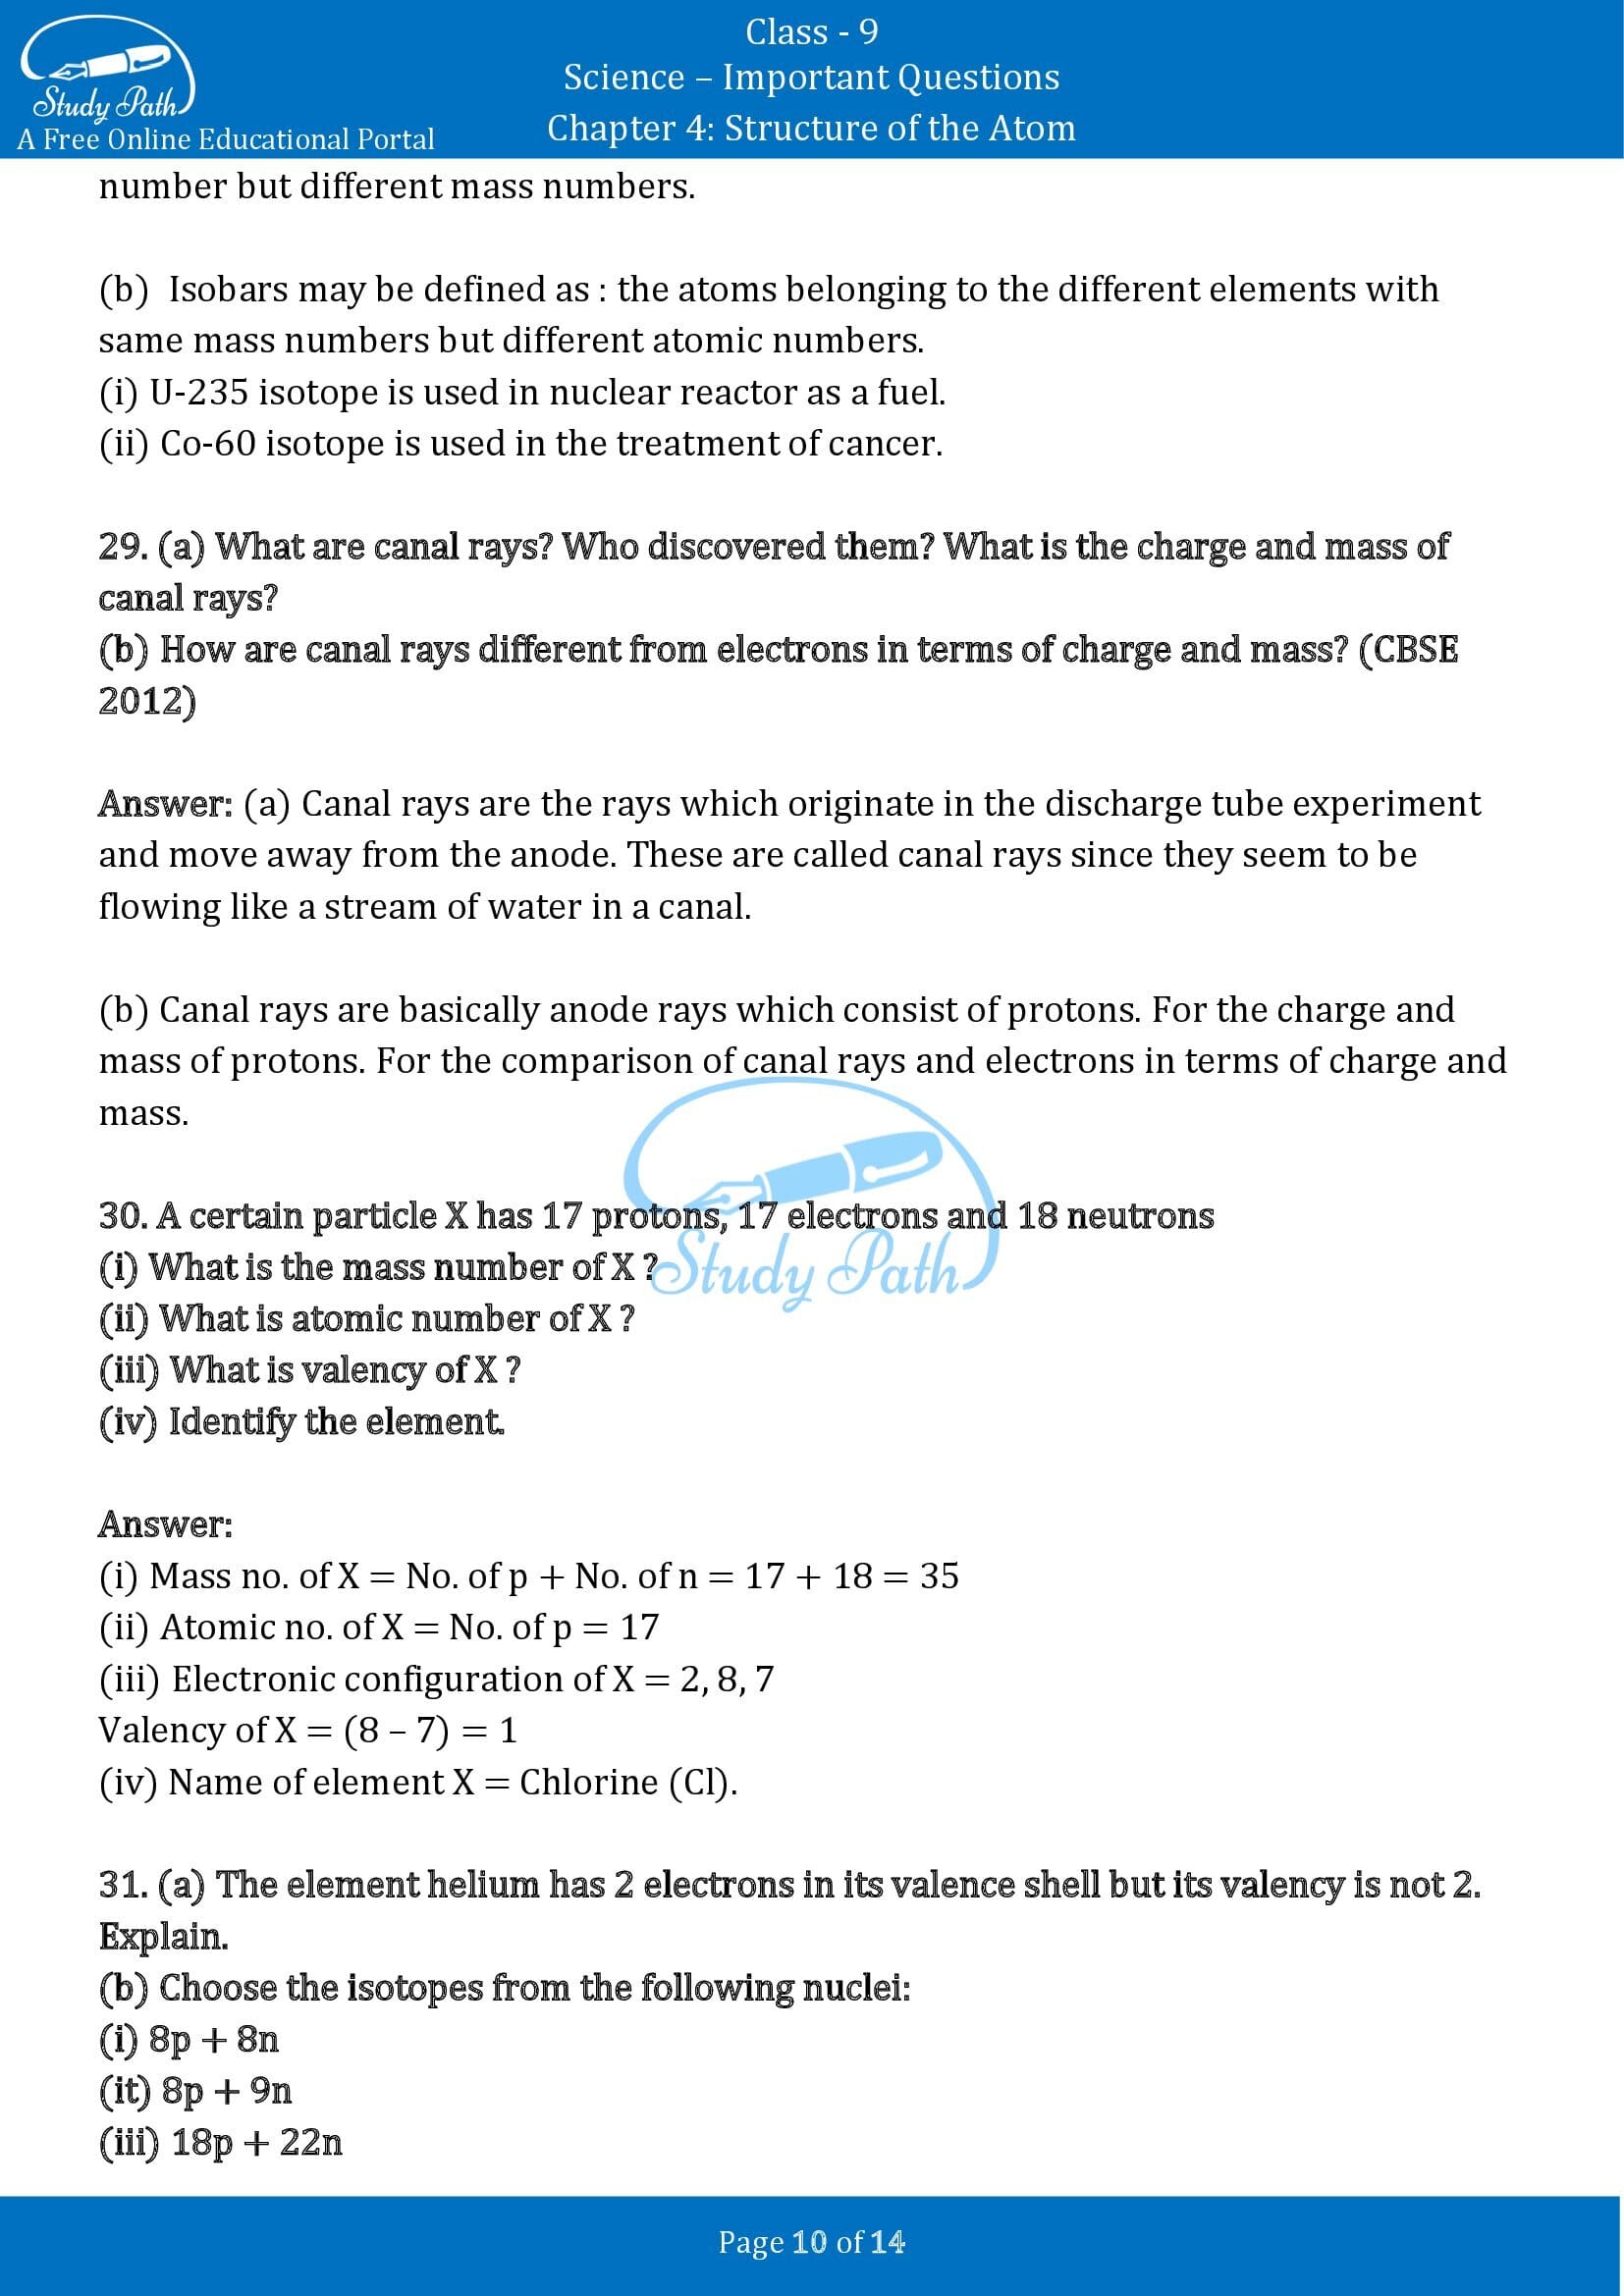 Important Questions for Class 9 Science Chapter 4 Structure of the Atom 00010